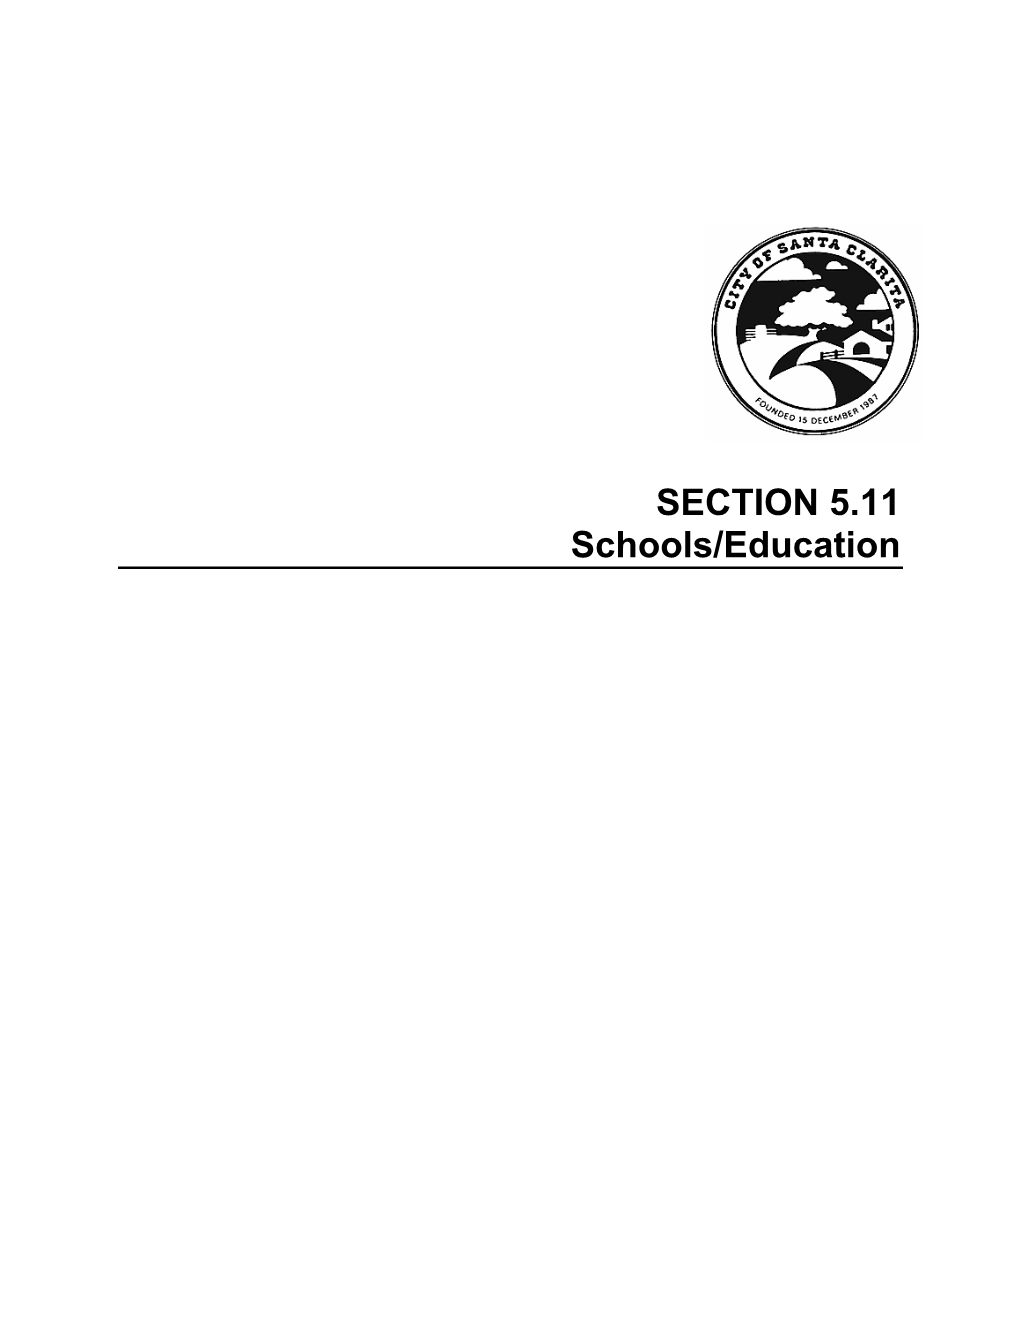 SECTION 5.11 Schools/Education